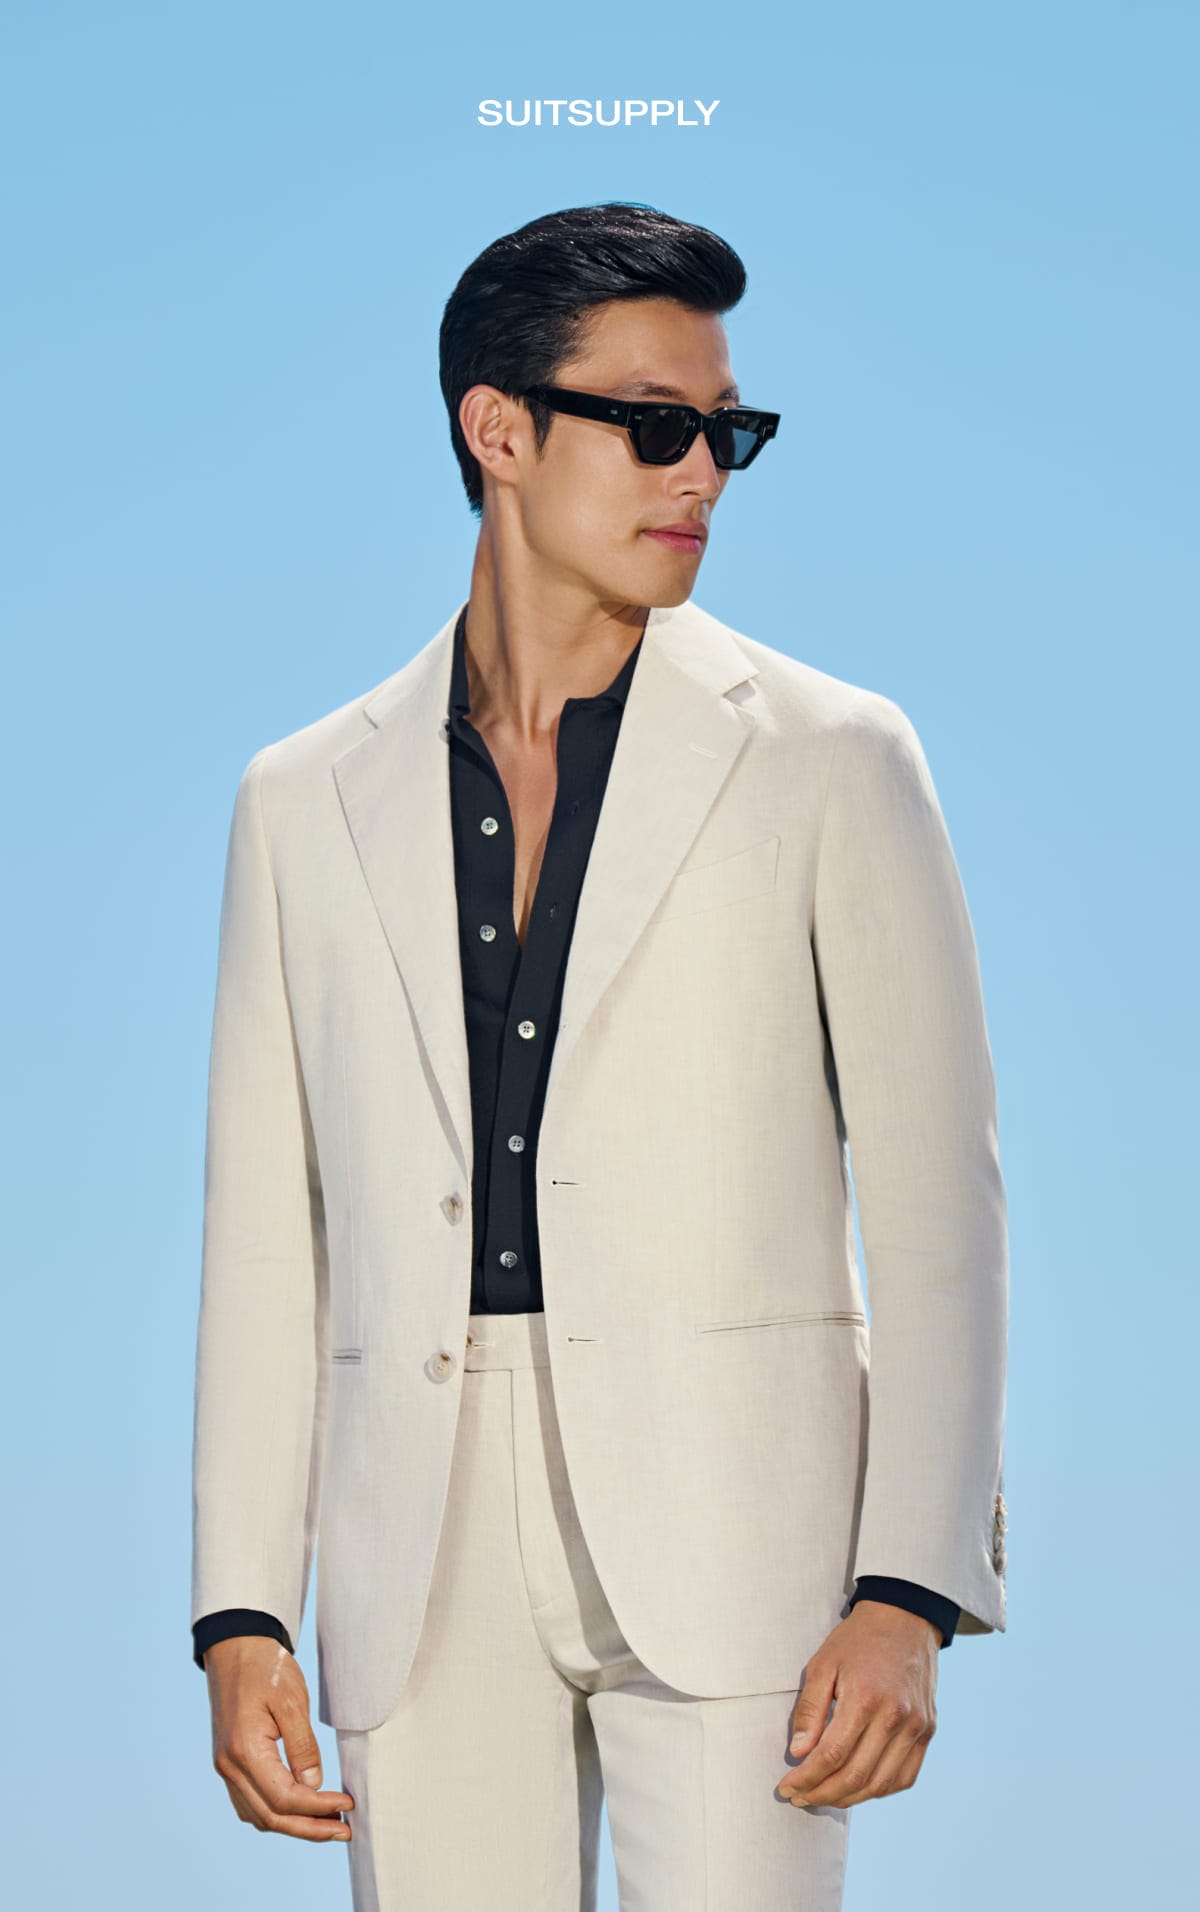 Our Most Popular Summer Suits